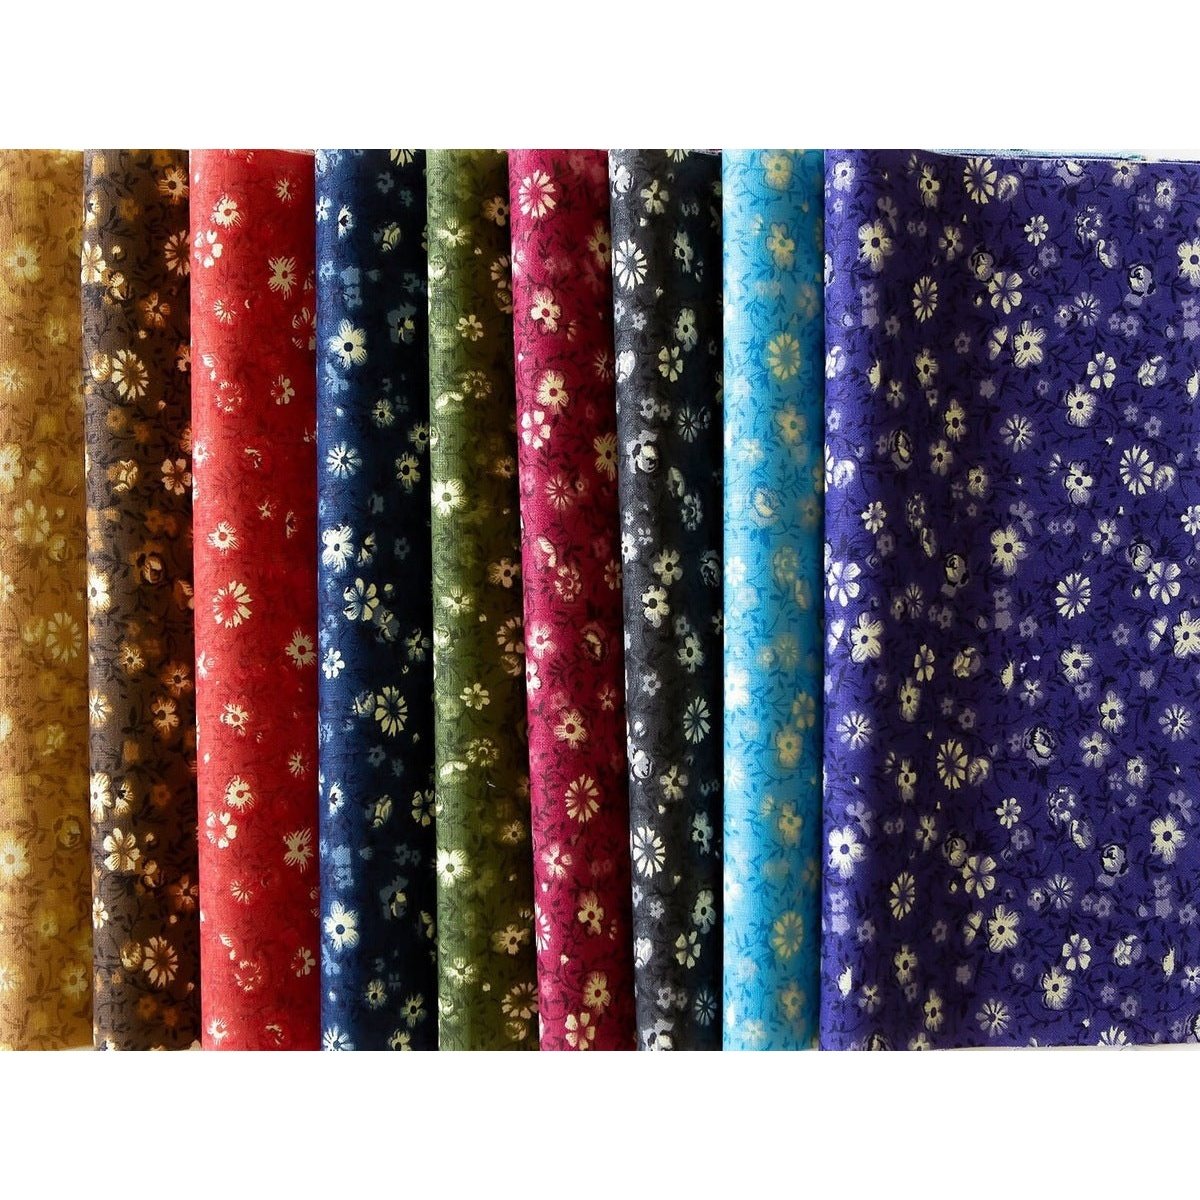 Strip Roll Botanical Gardens Strip Roll 100% cotton fabric quilting strips 18 pieces quilt fabric